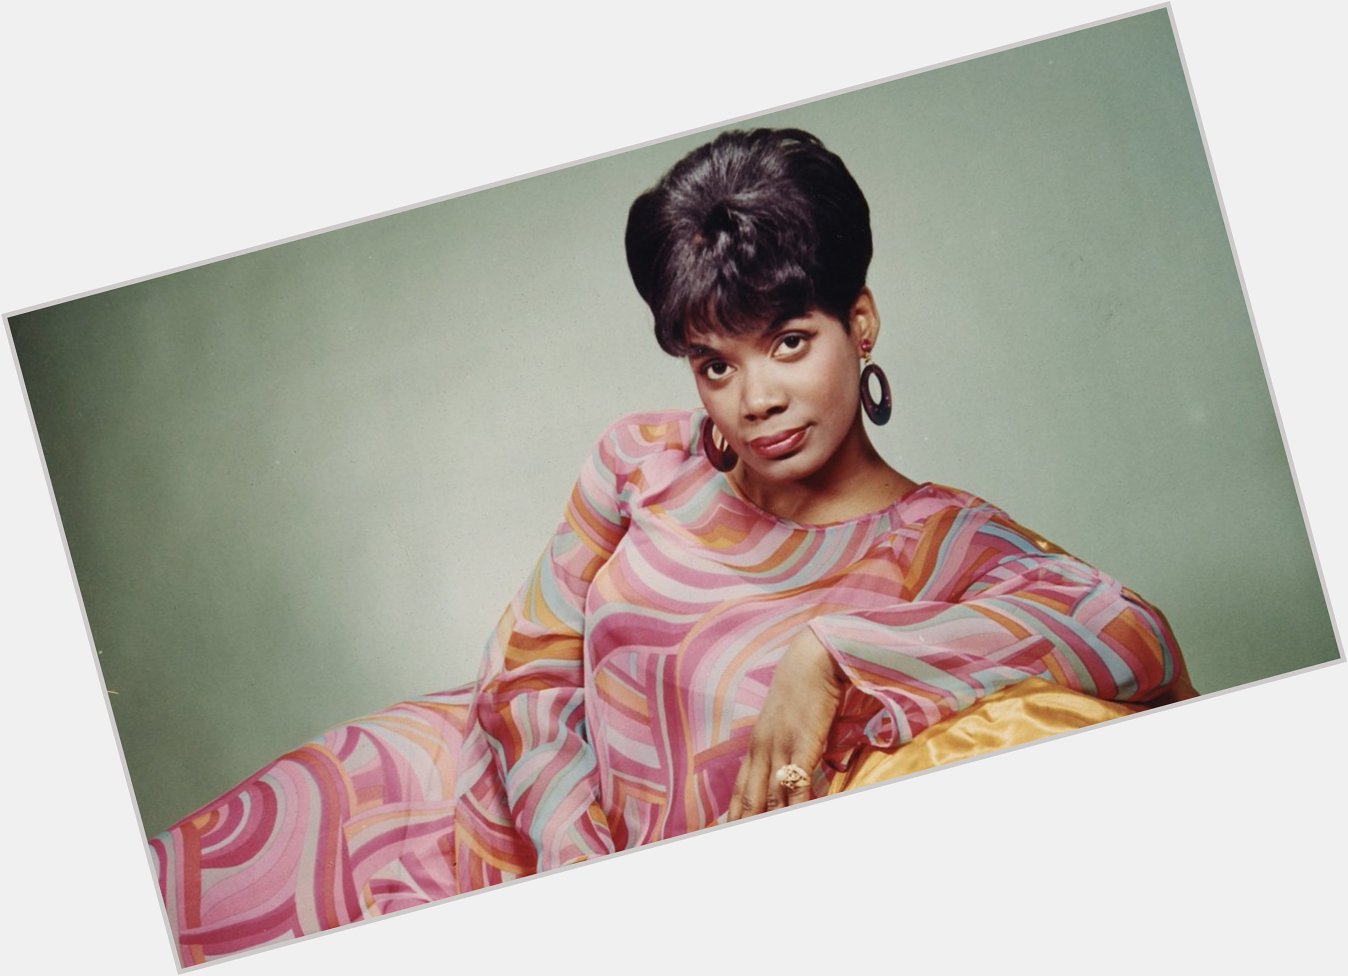 Wishing a very happy birthday to Stax legend Carla Thomas, the \"Queen of Memphis Soul\" 